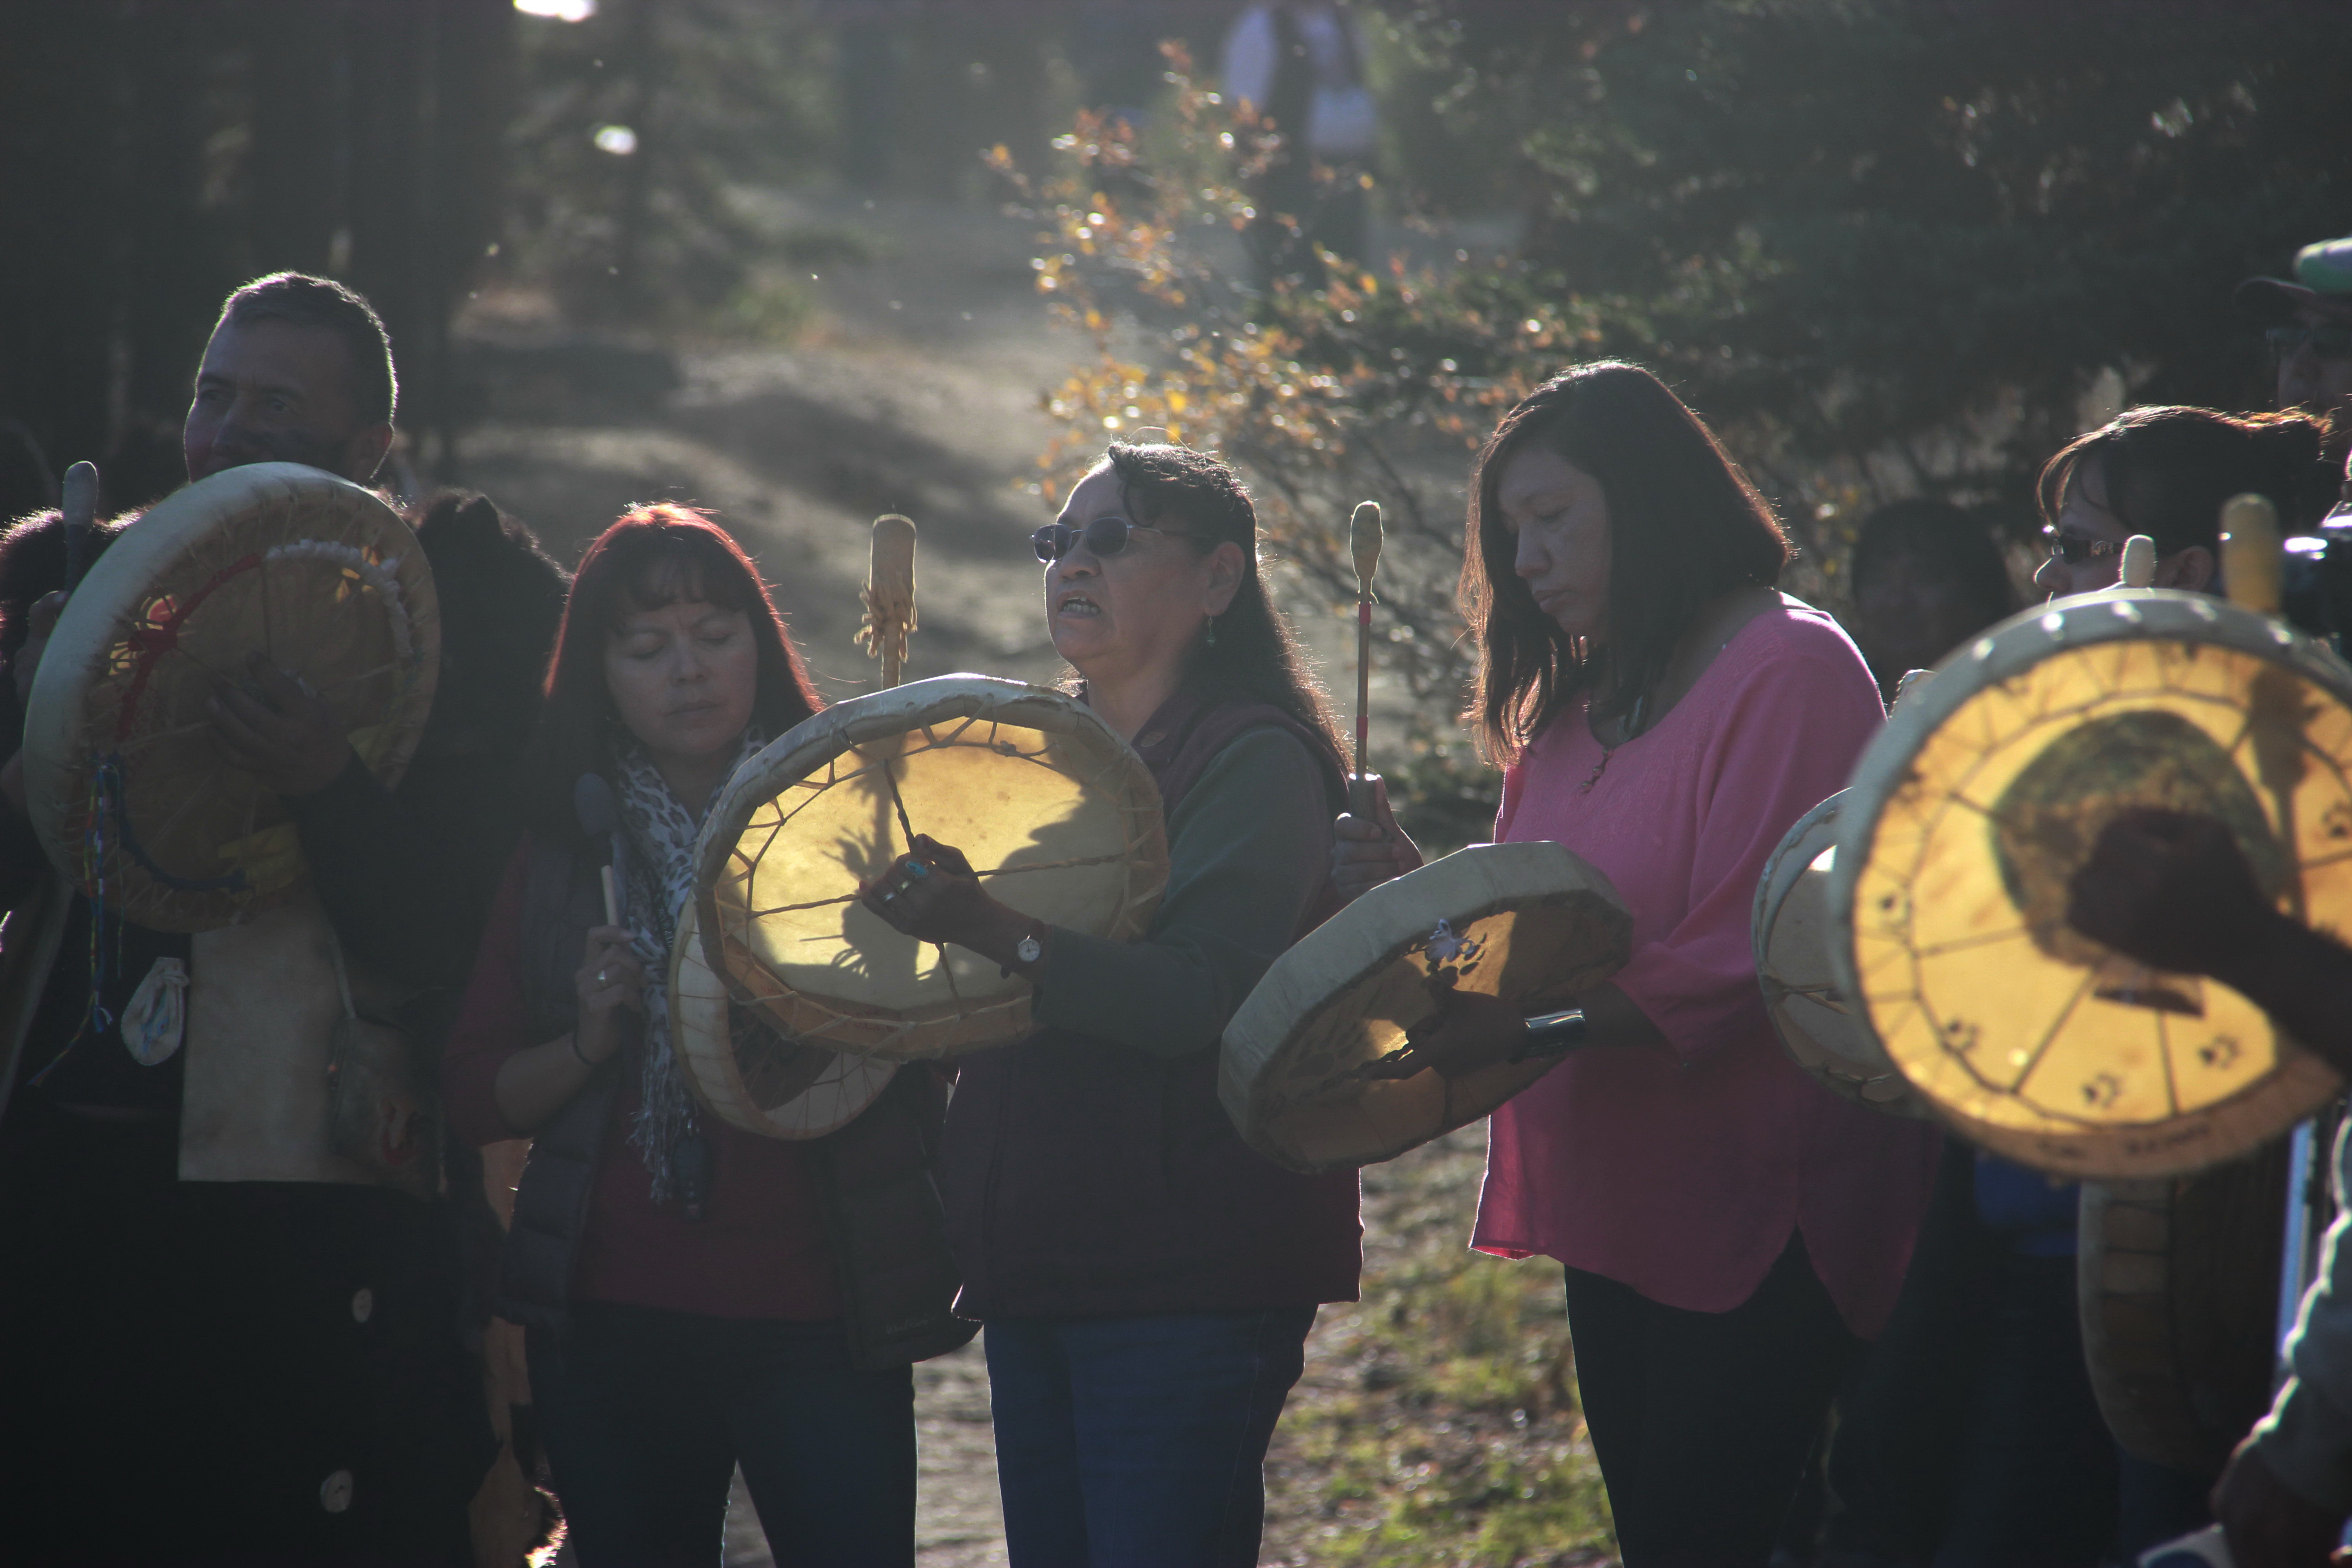 A group of Indigenous people in a circle drumming. End of image description.